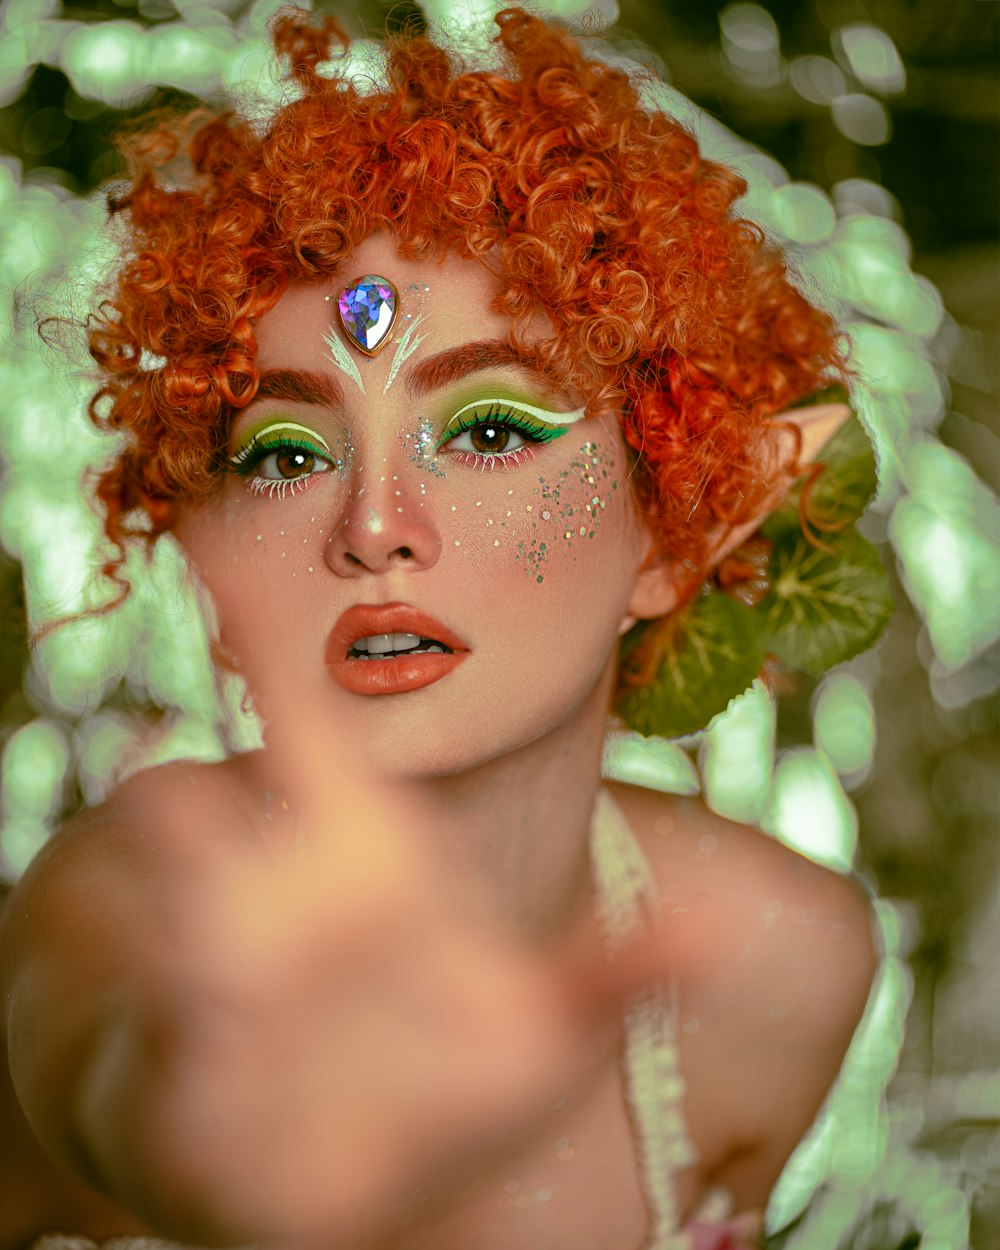 a woman with red hair and green makeup